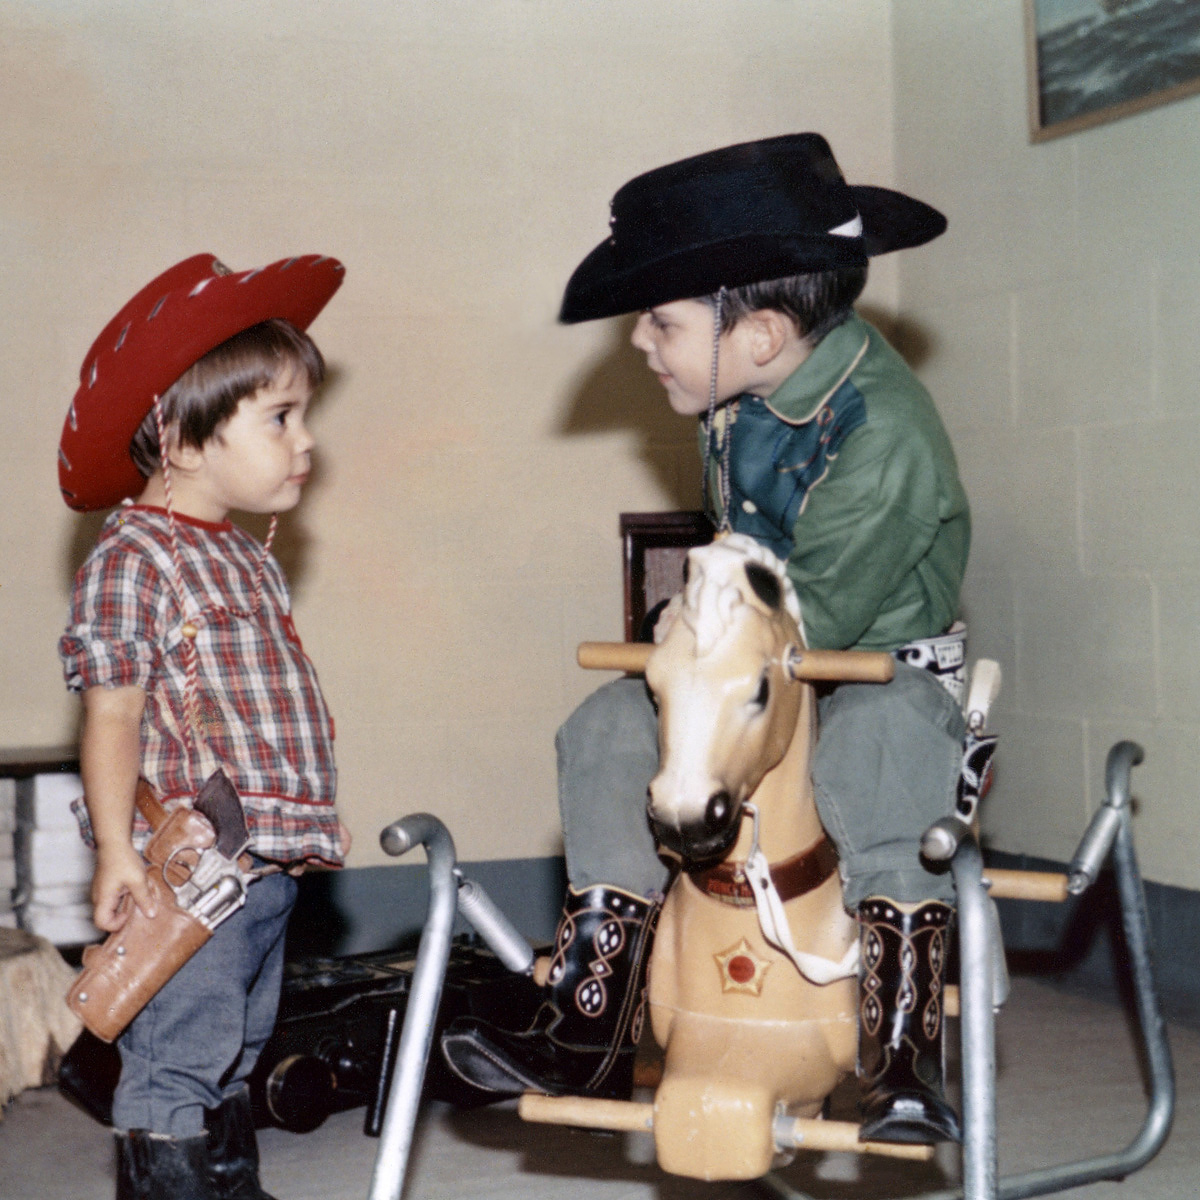 My cousins Sue and Dean playing cowboys during 1968 in the basement of their home in West Bend, Wisconsin. I get the impression that when this photo was snapped the subjects were having a discussion as to why Sue couldn’t be the one riding the horse. View full size.